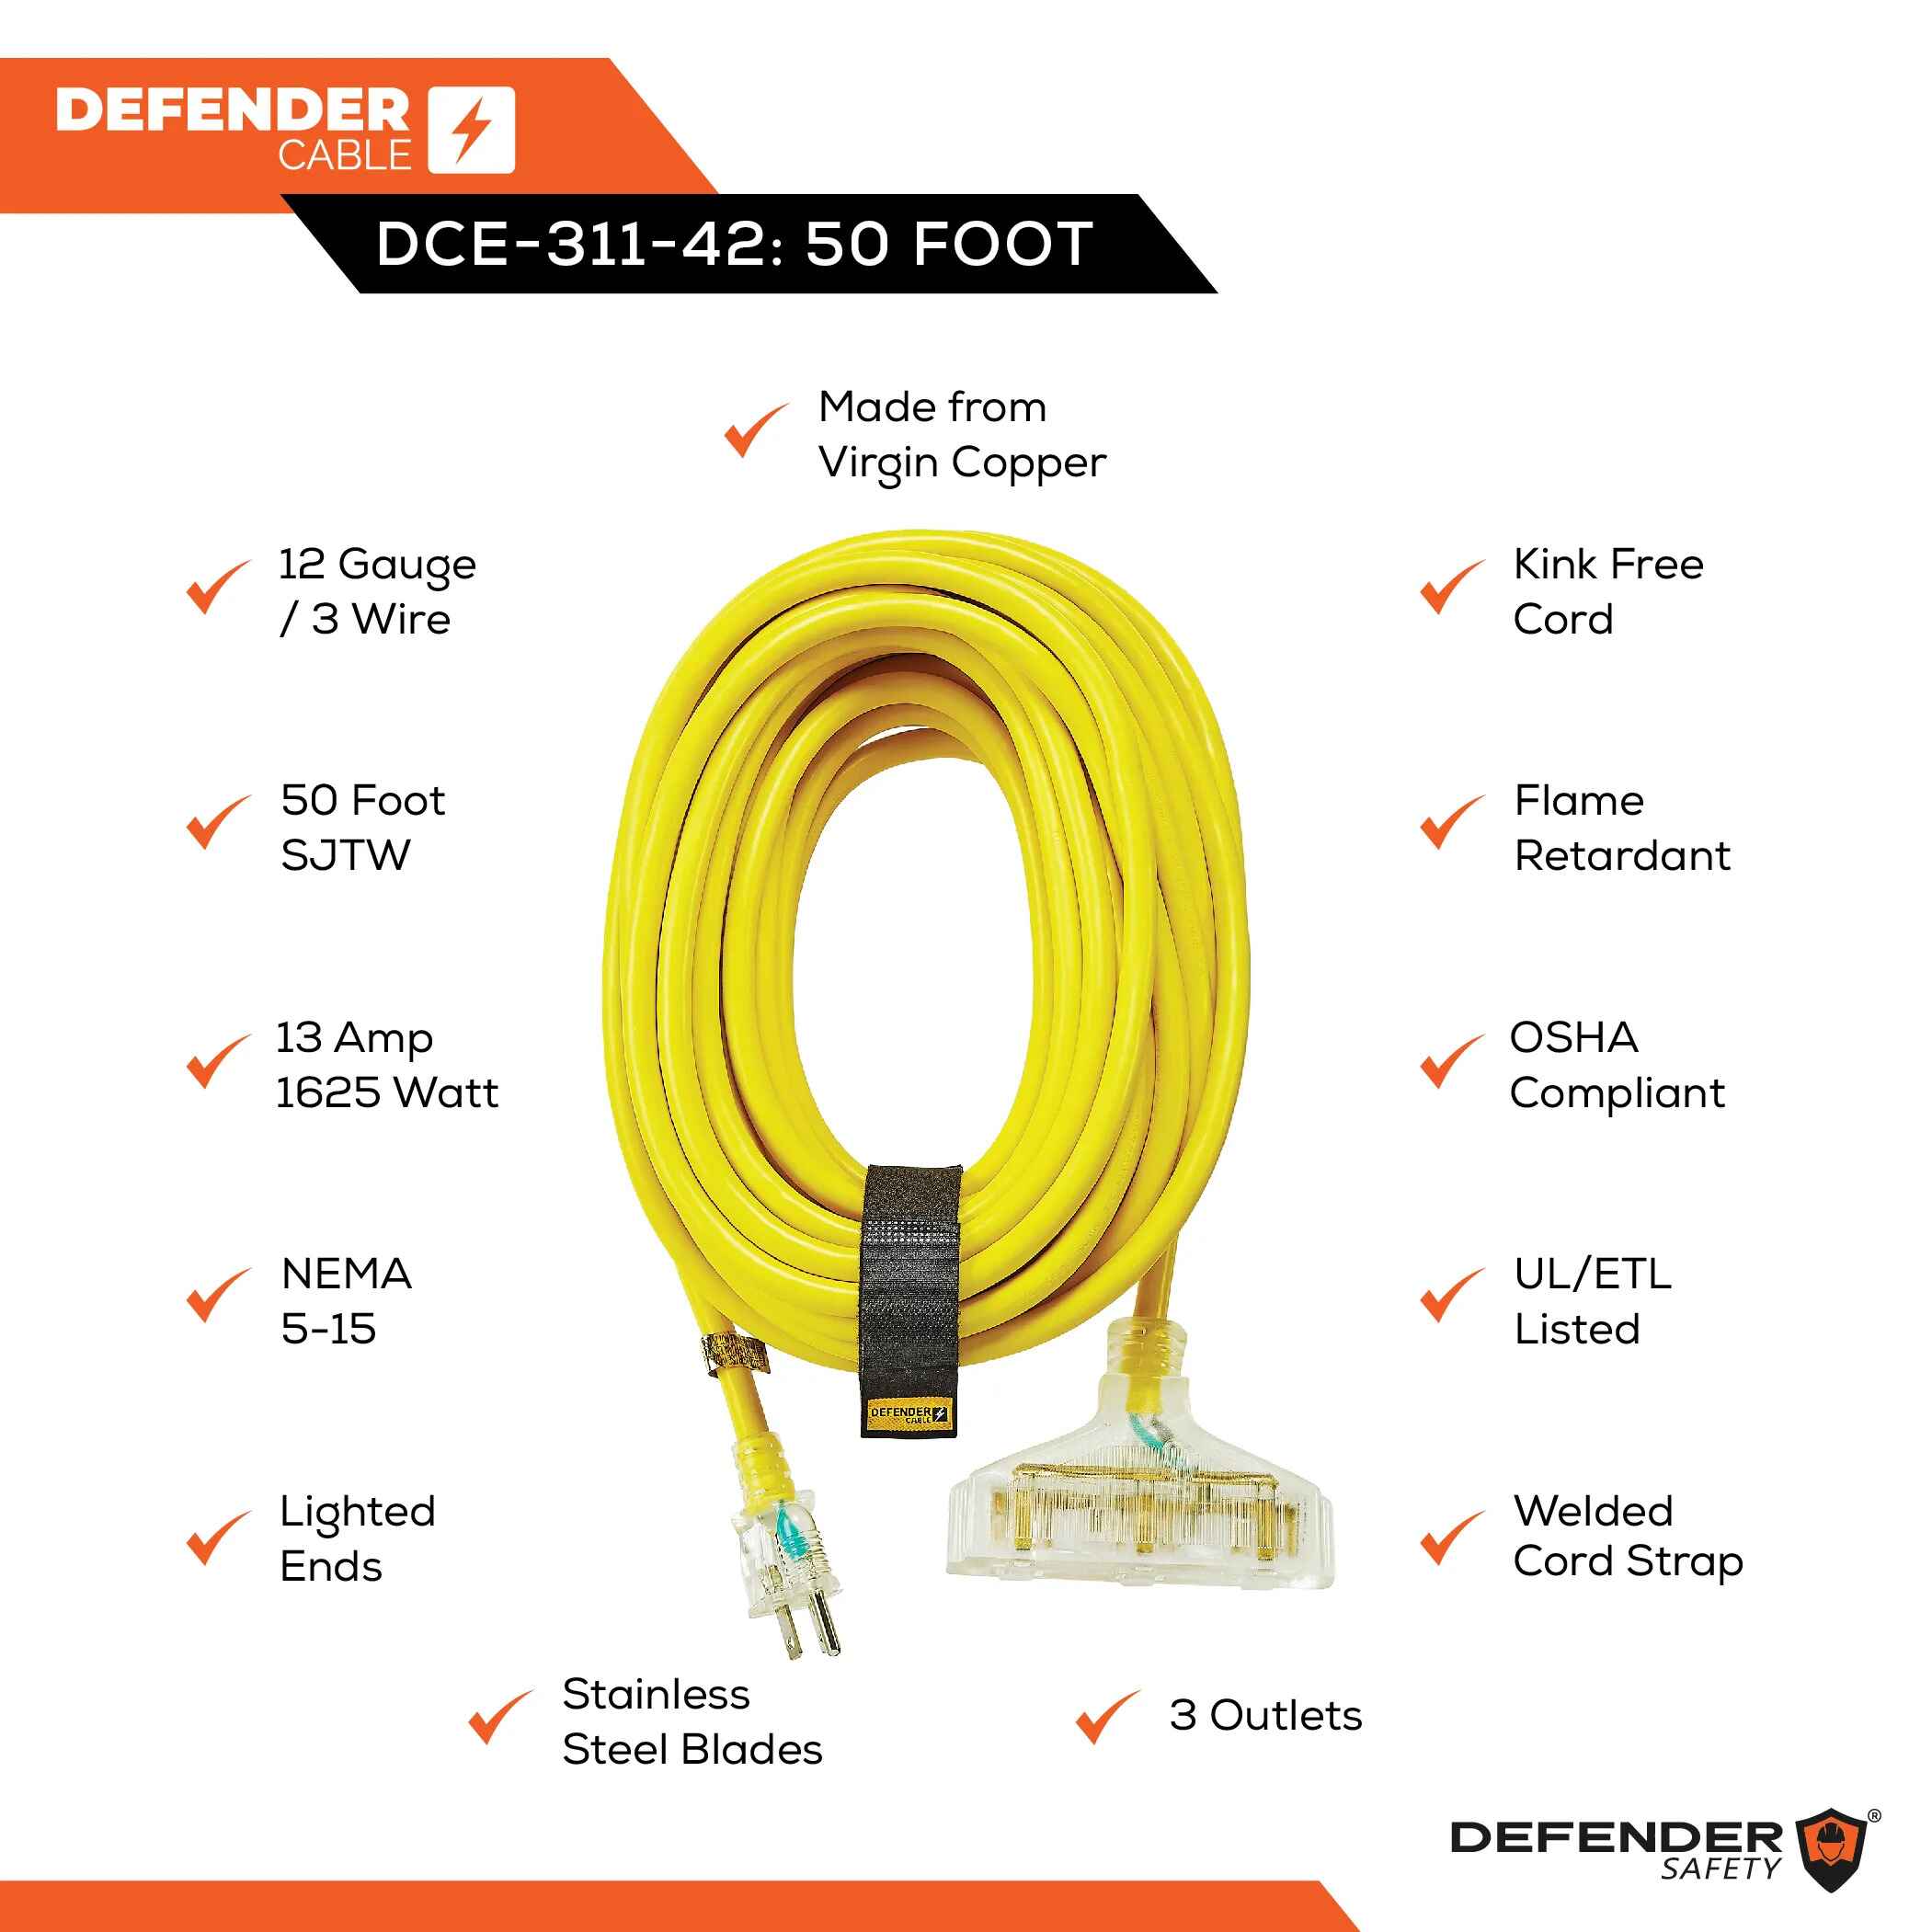 50 Ft . USA. Generator Extension Cord 10/3 Wire USA . Power Cable